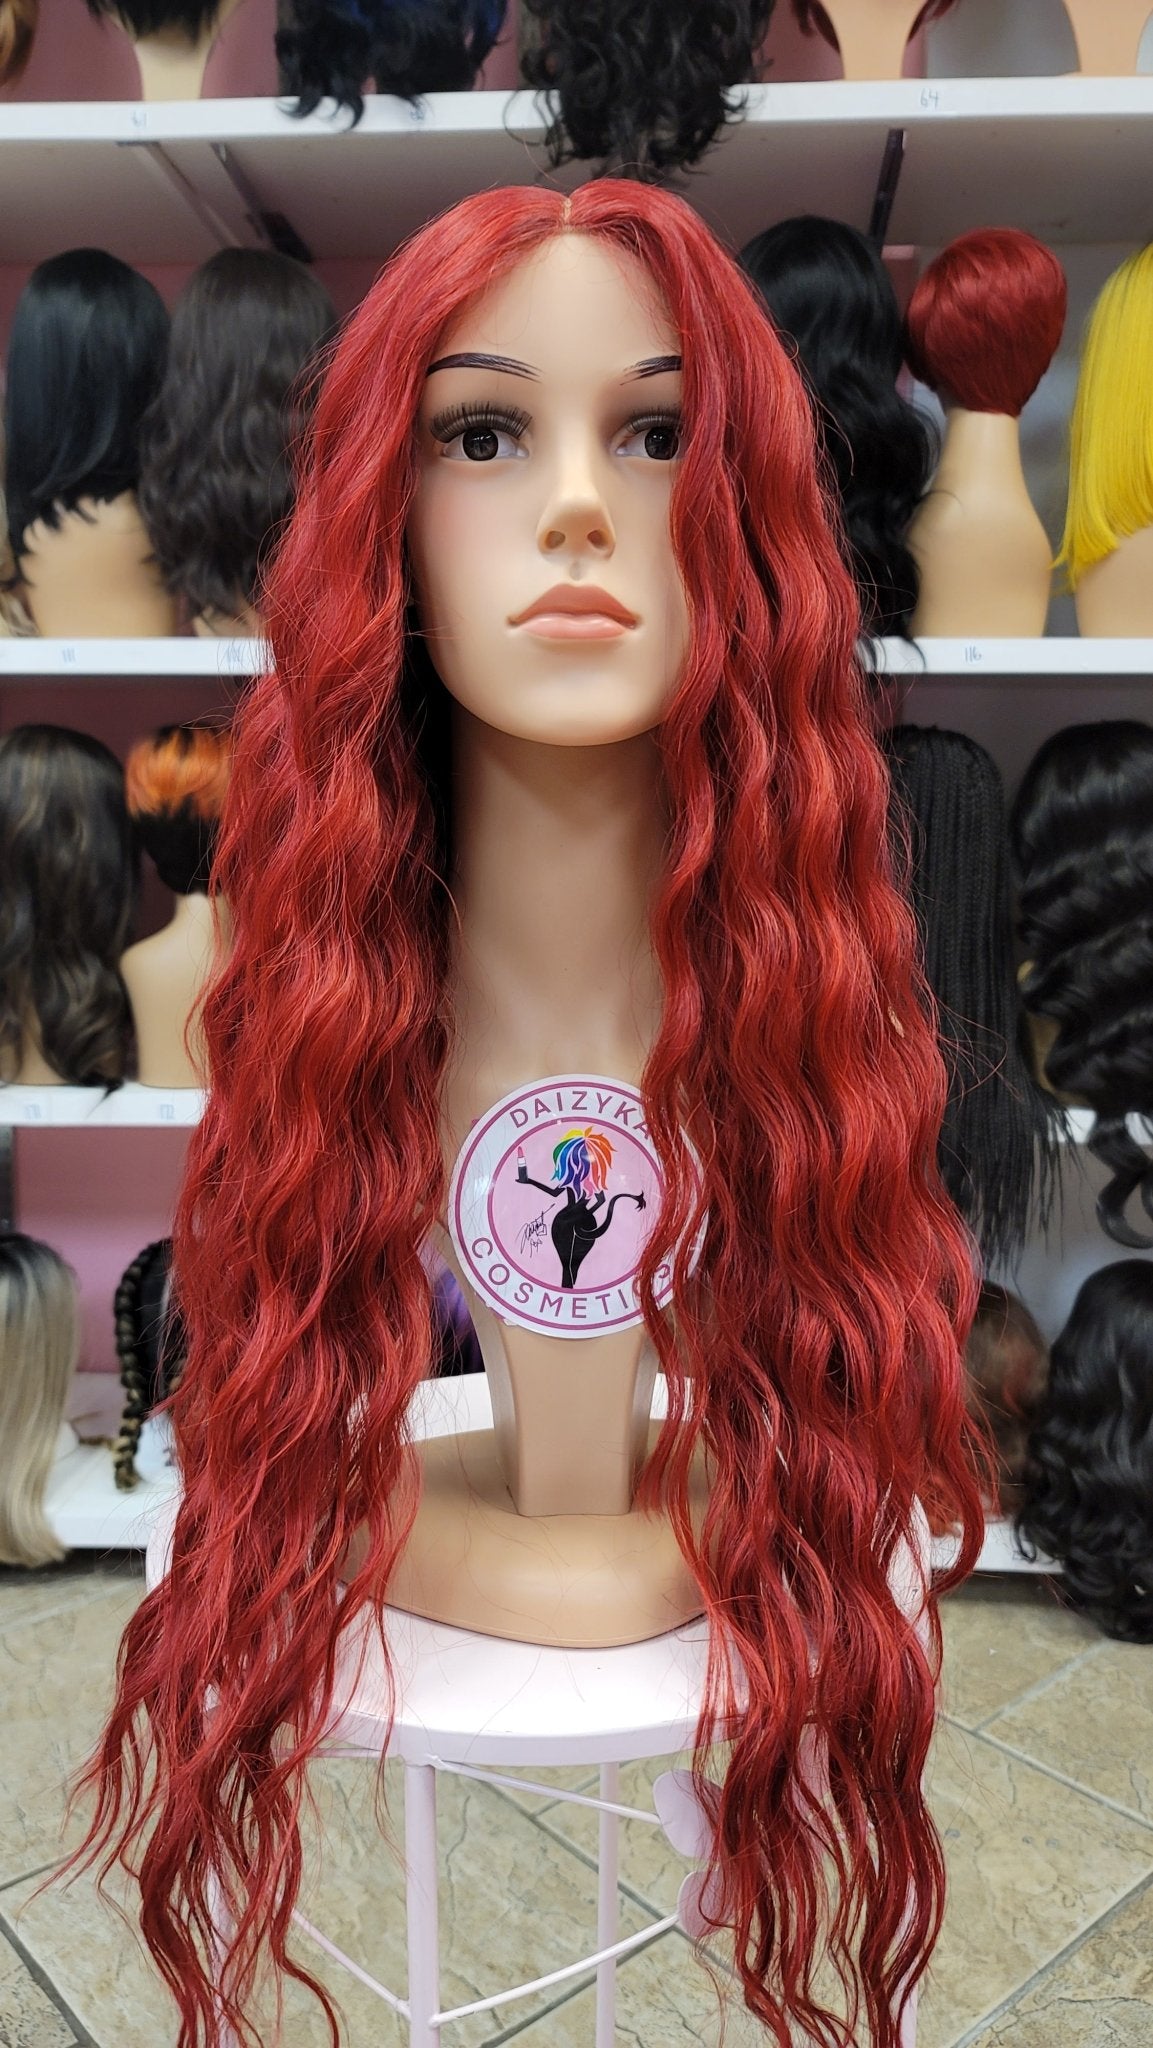 213 Brittney - Middle Part Lace Front Wig Human Hair Blend- RED - DaizyKat Cosmetics 213 Brittney - Middle Part Lace Front Wig Human Hair Blend- RED DaizyKat Cosmetics Wigs